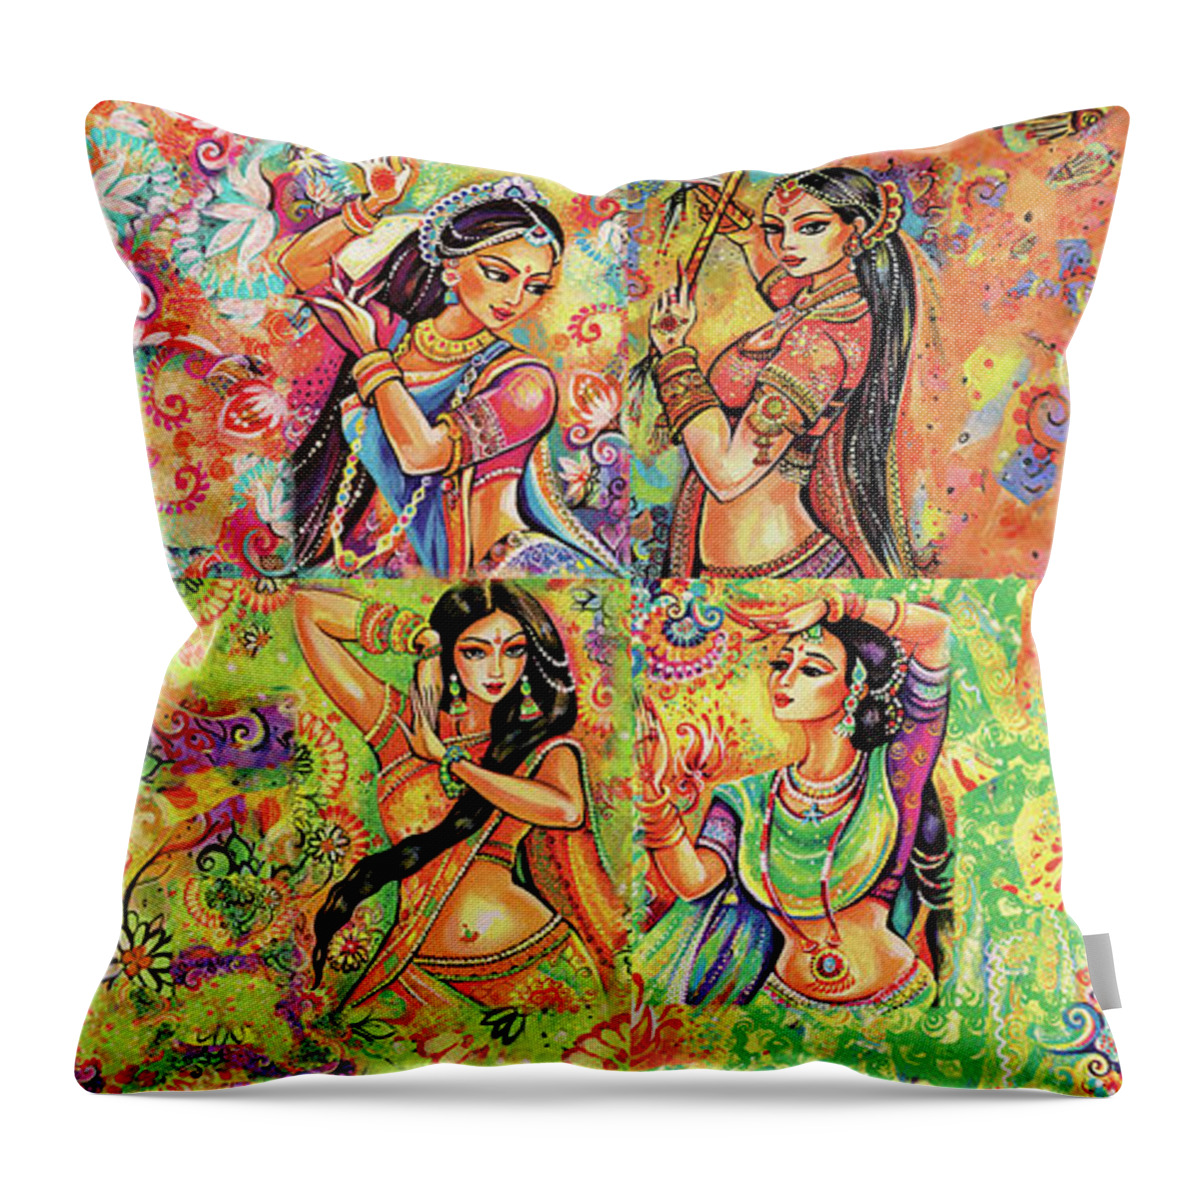 Bollywood Dancer Throw Pillow featuring the painting Magic of Dance by Eva Campbell